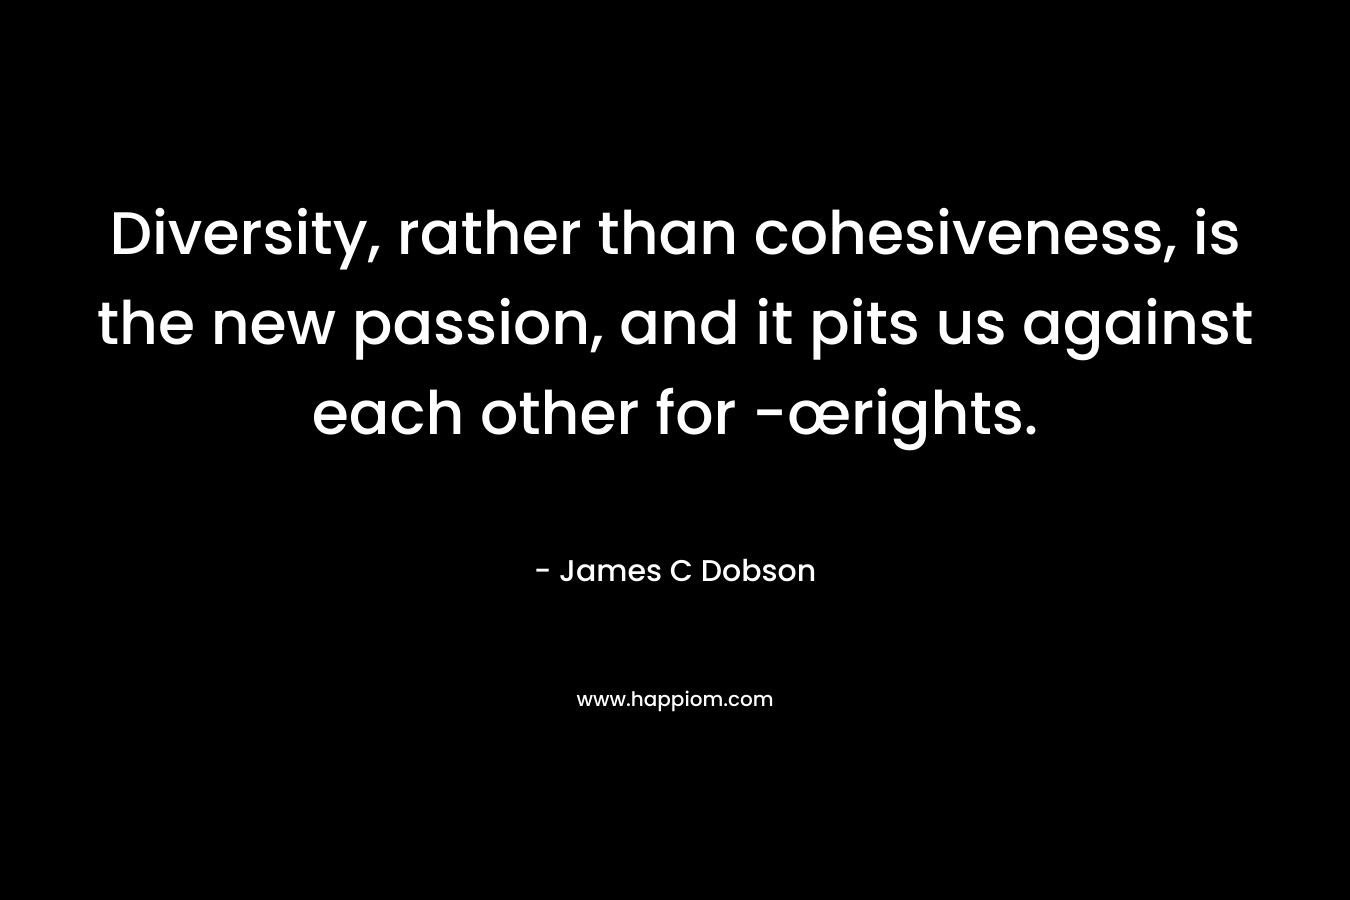 Diversity, rather than cohesiveness, is the new passion, and it pits us against each other for -œrights. – James C Dobson